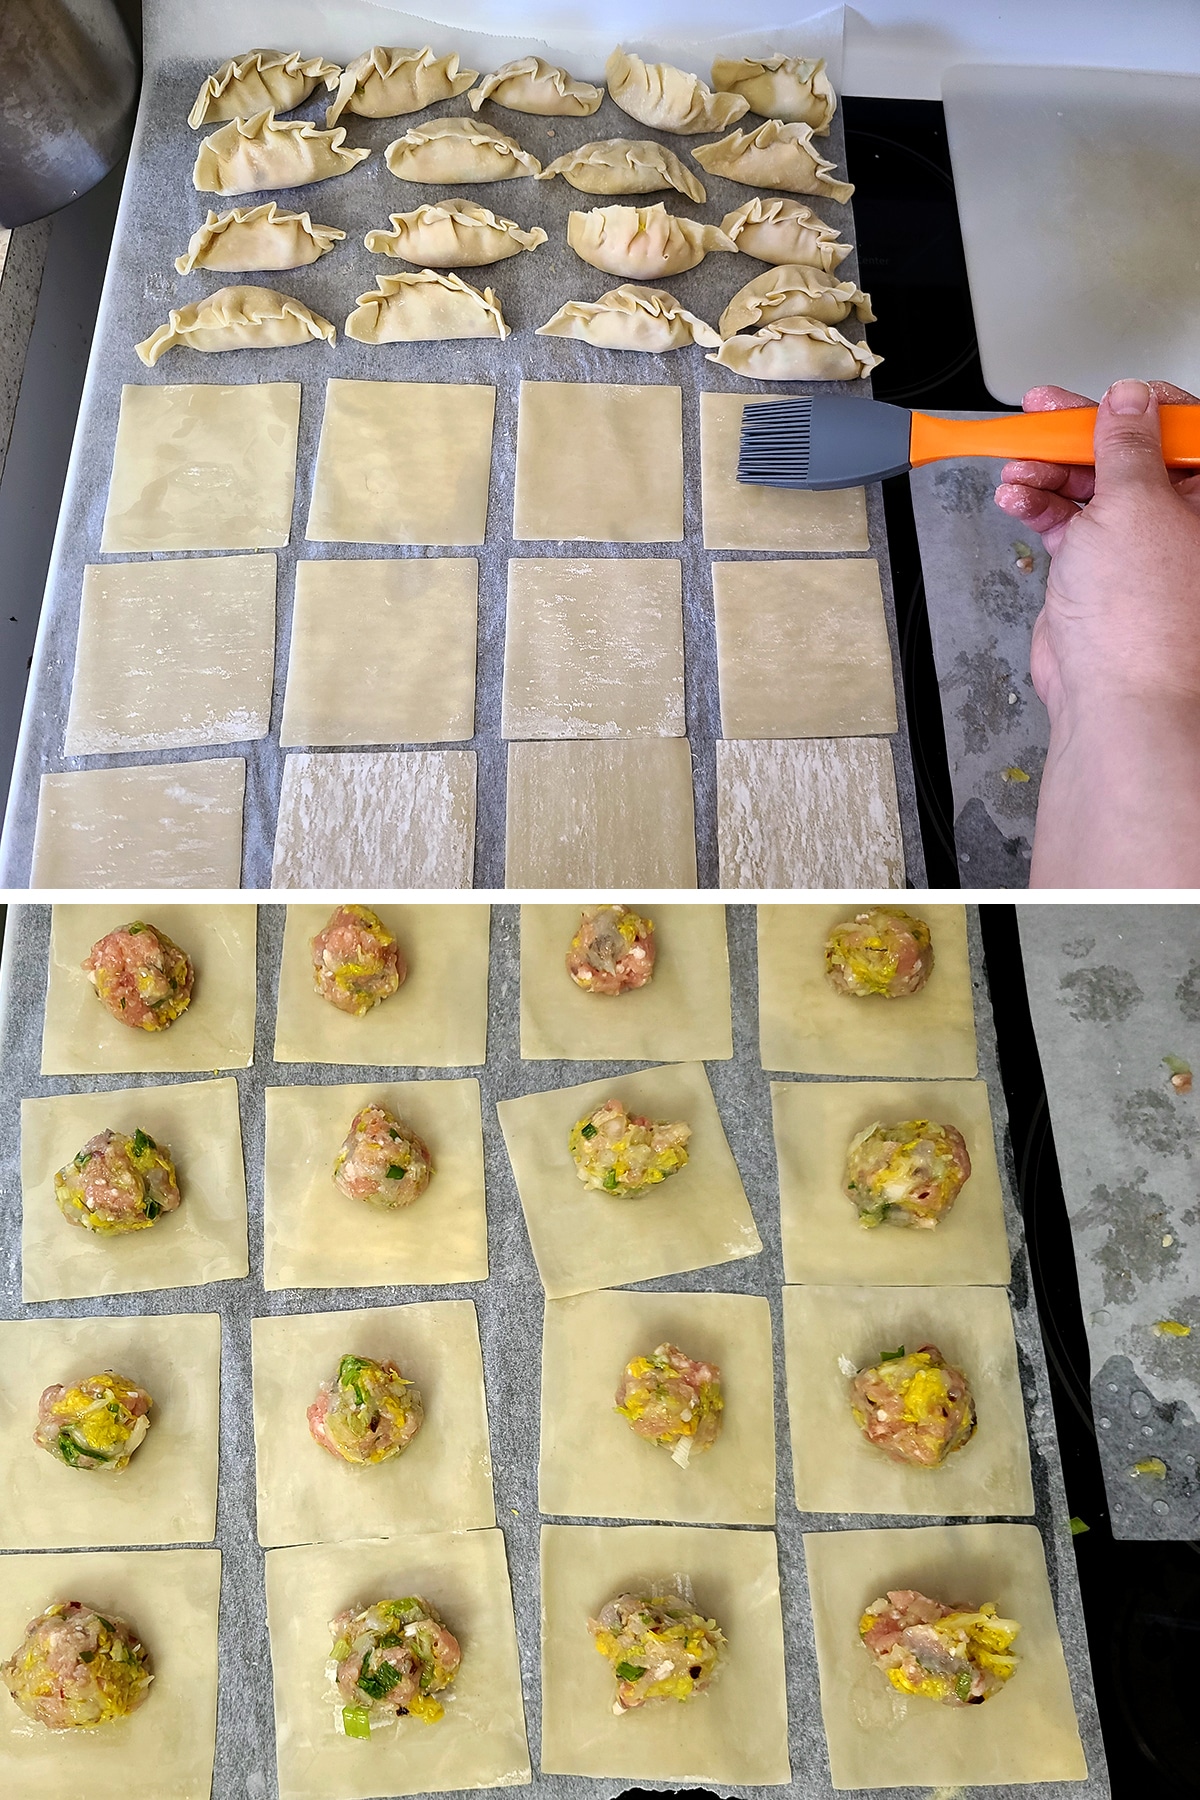 water is brushed over won ton wrappers, then filling balls are centered on each wrapper.